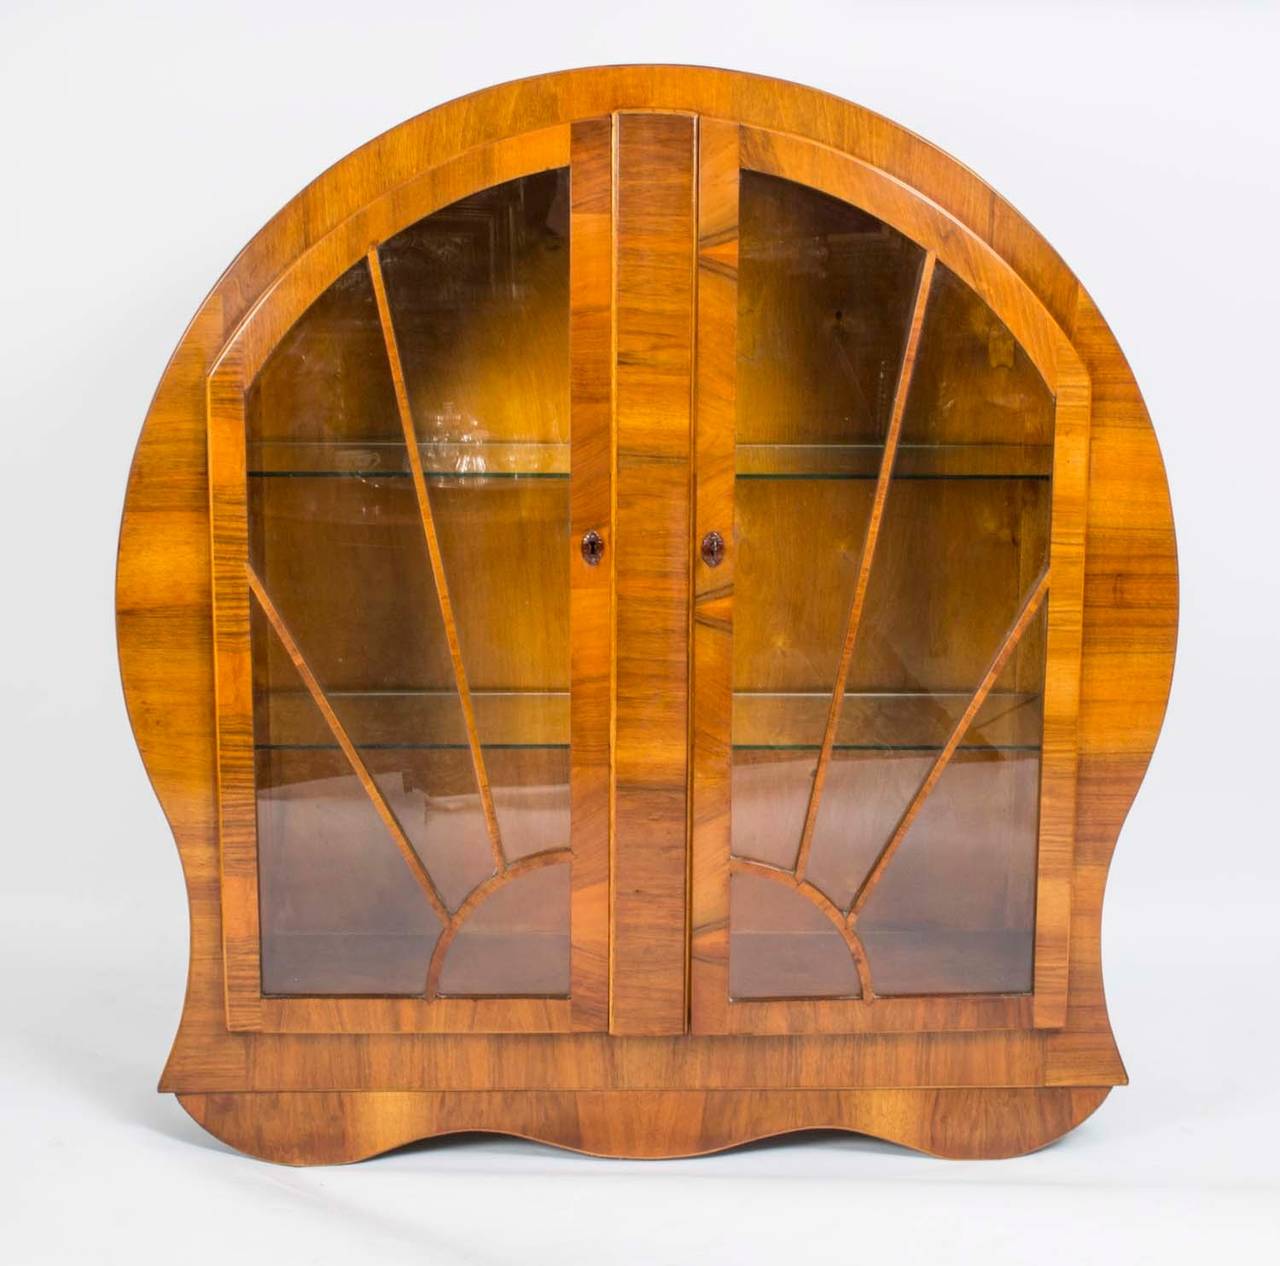 This is a lovely, antique Art Deco burr walnut display cabinet with sunrise glazed door, circa 1920 in date. 

The astragal glass door enclose two glass shelves and features original handles, working lock and key. 

The cabinet can be used to